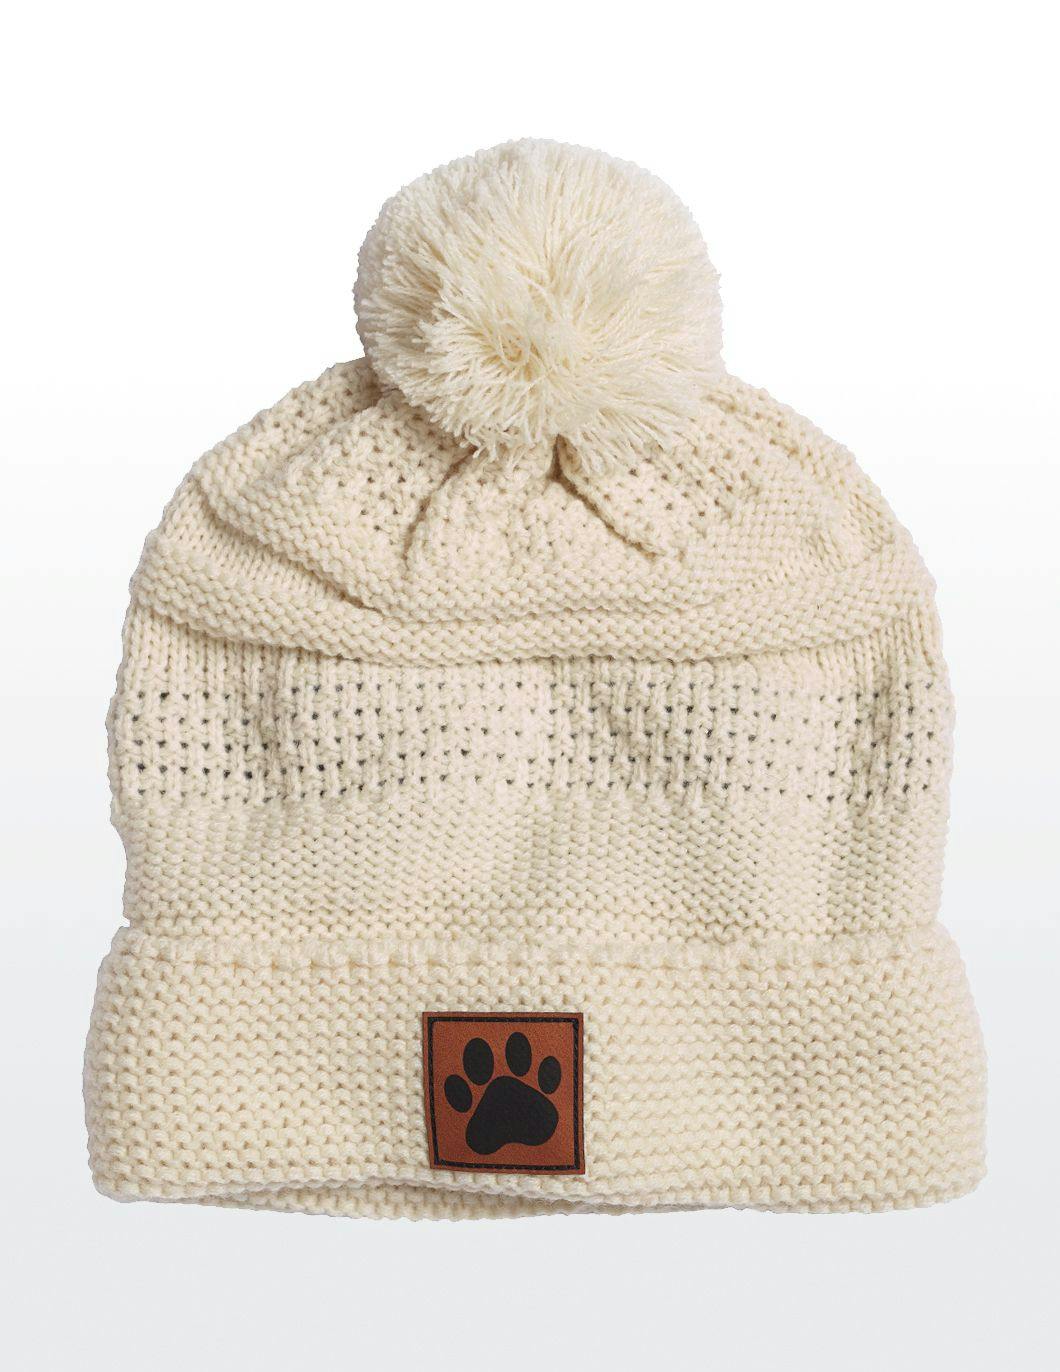 cap-america-knit-cap-with-leather-paw-patch-ivory